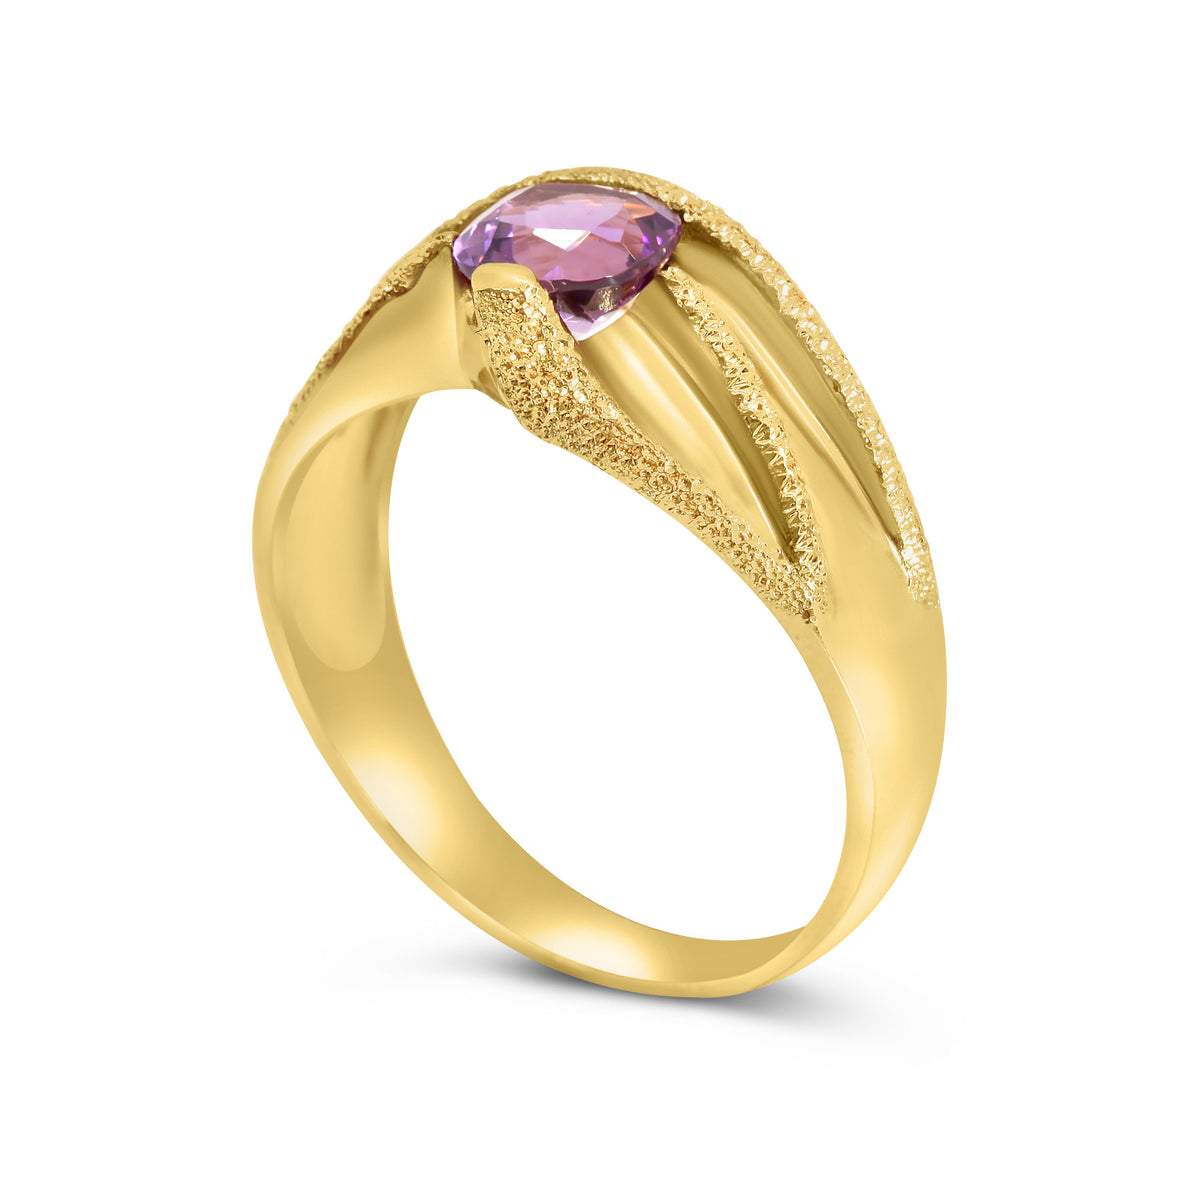 Multi Textured Ring with Amethyst